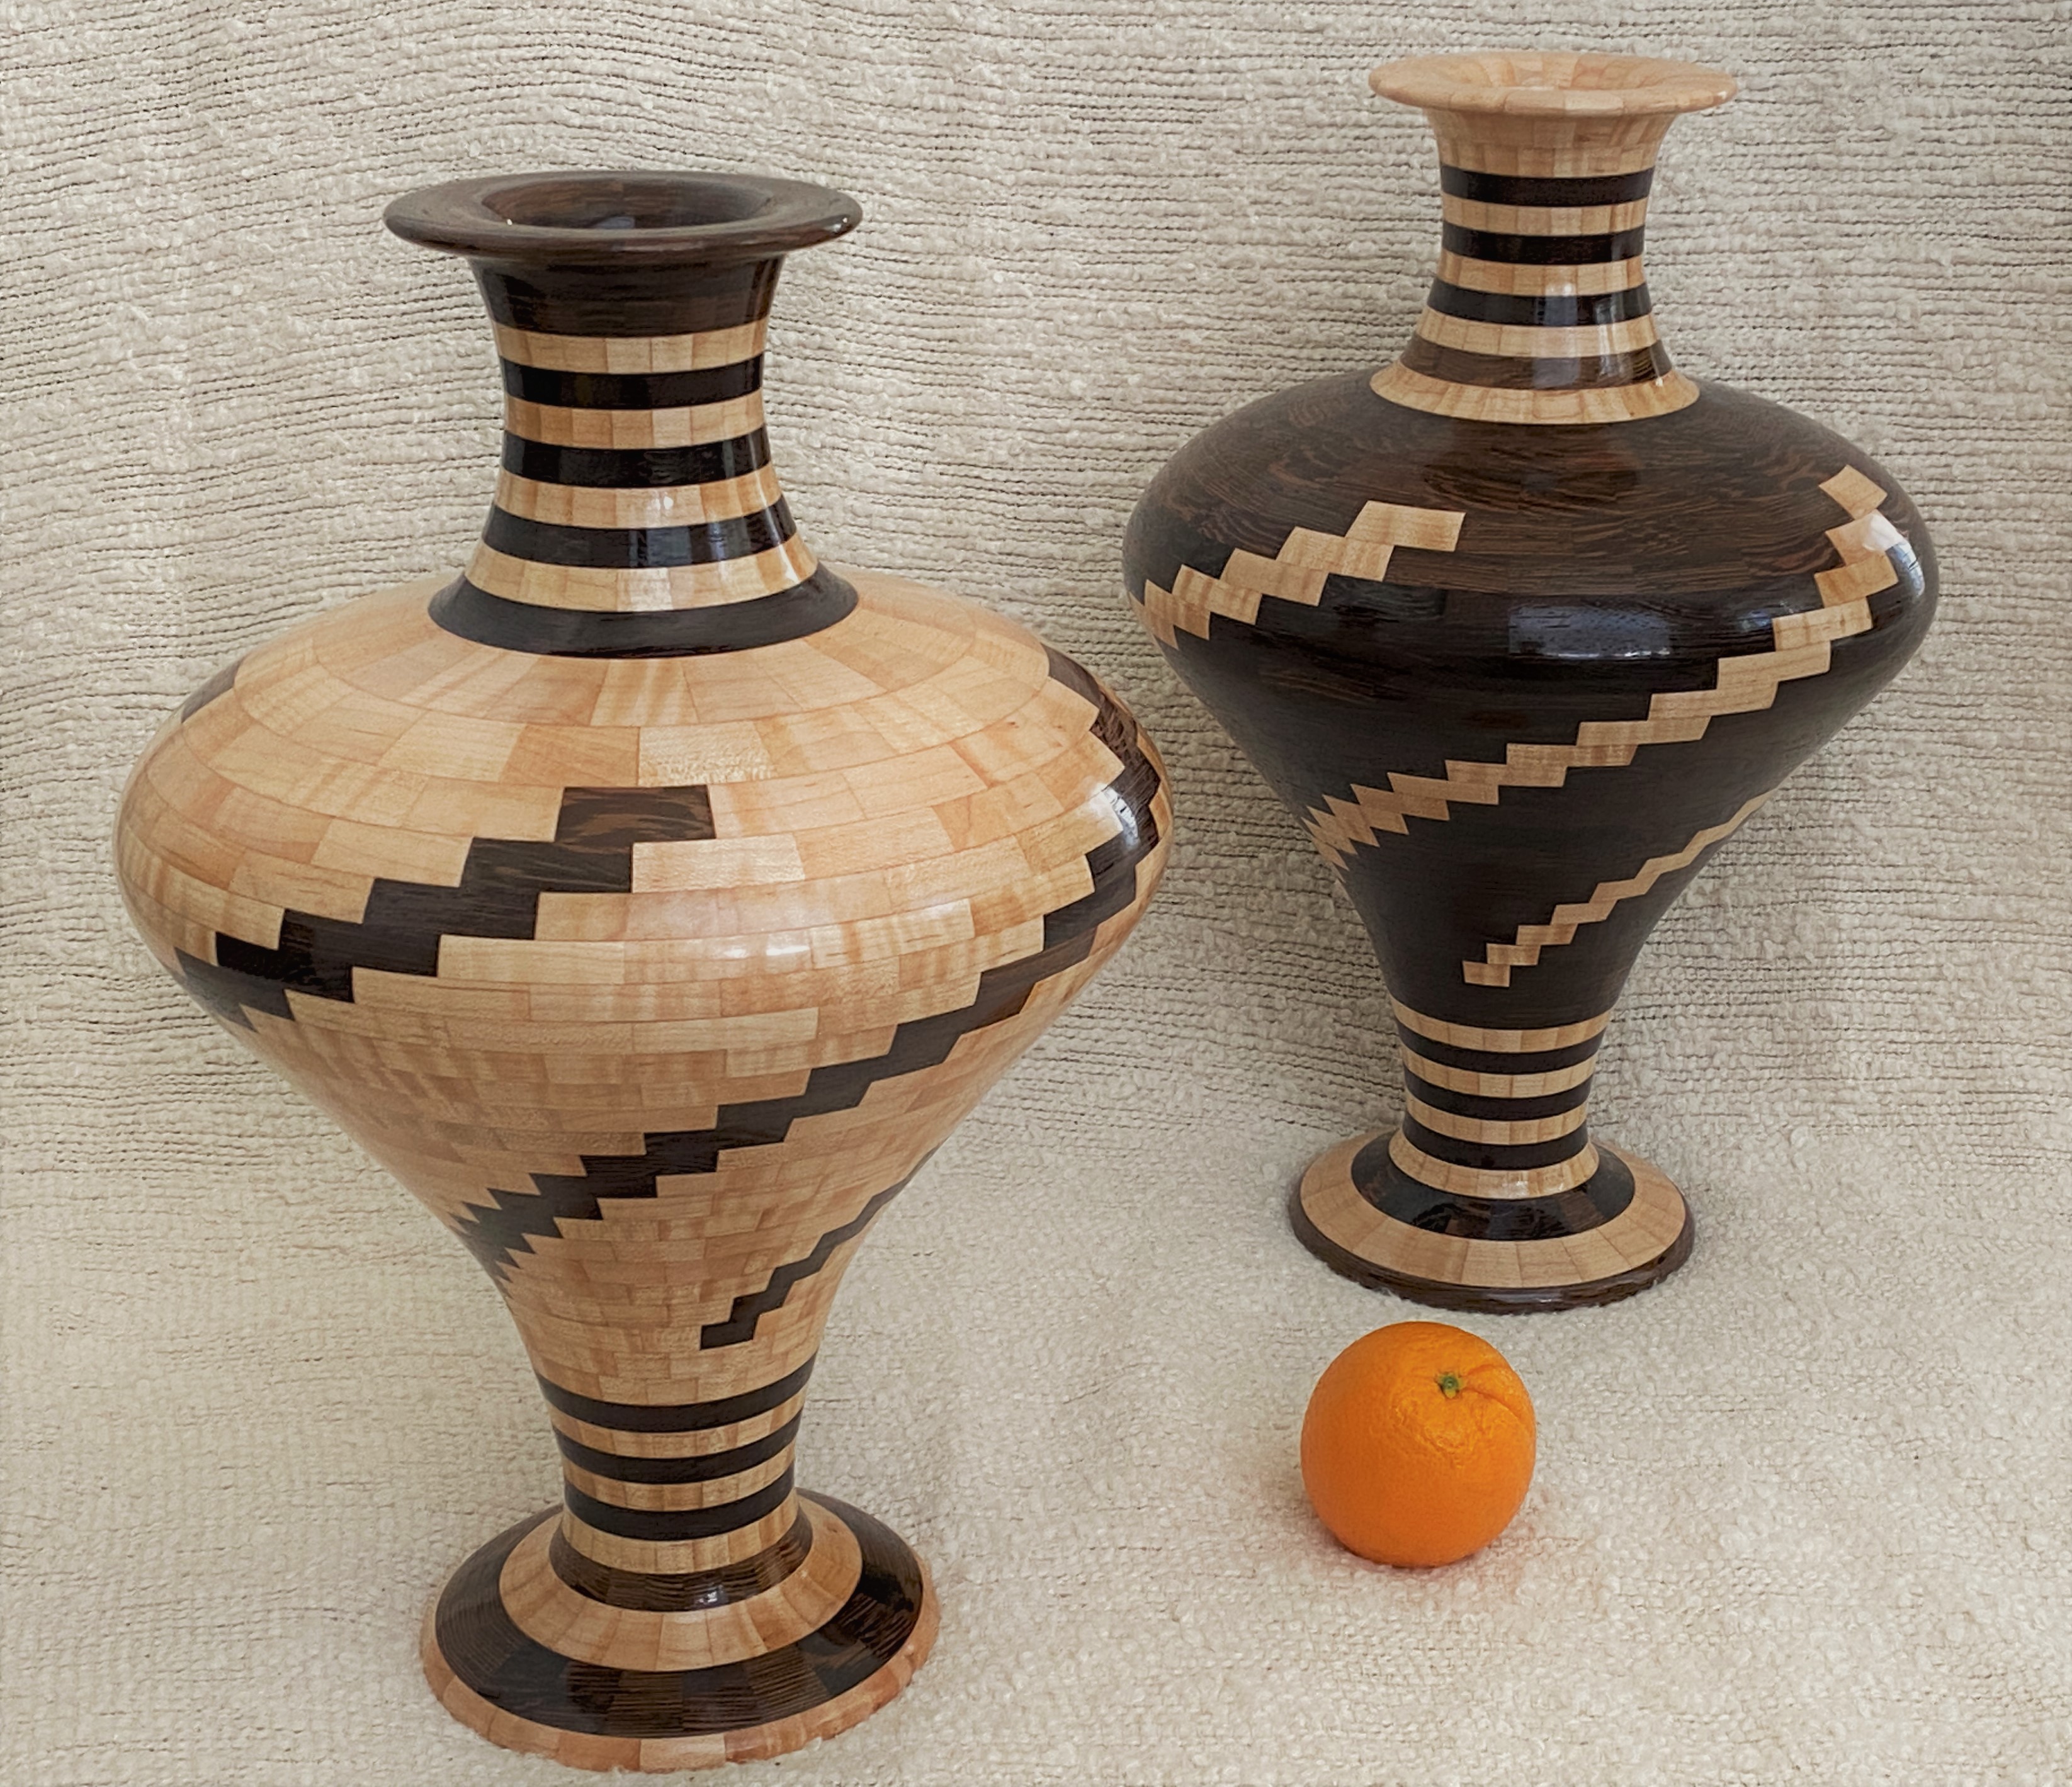 Two Vases and a Navel Orange